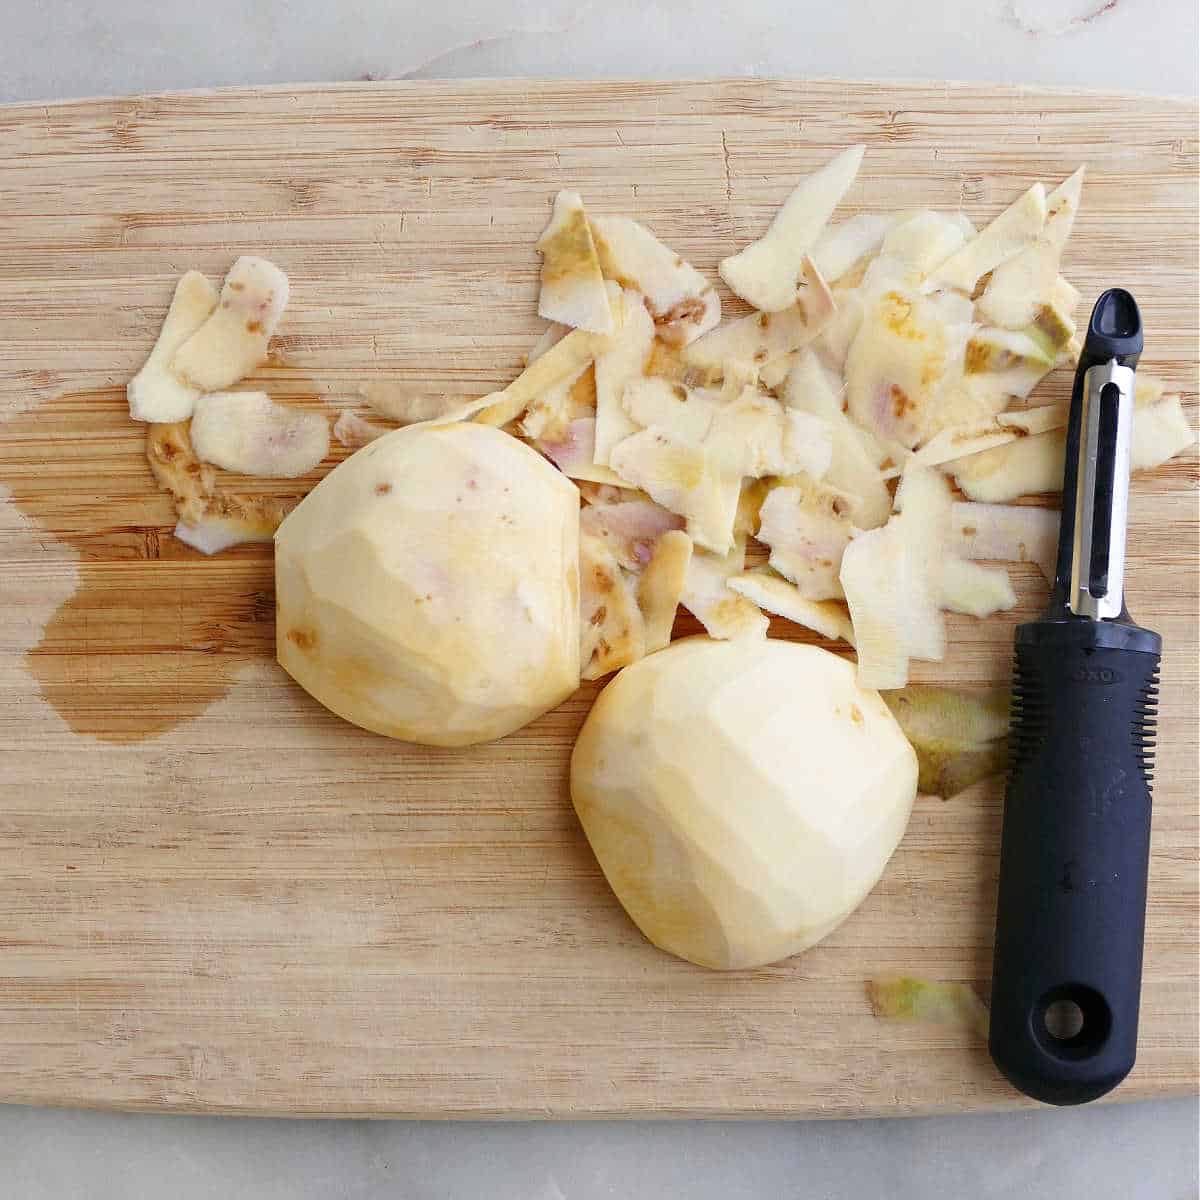 two halves of rutabaga peeled with a swivel peeler on a bamboo cutting board